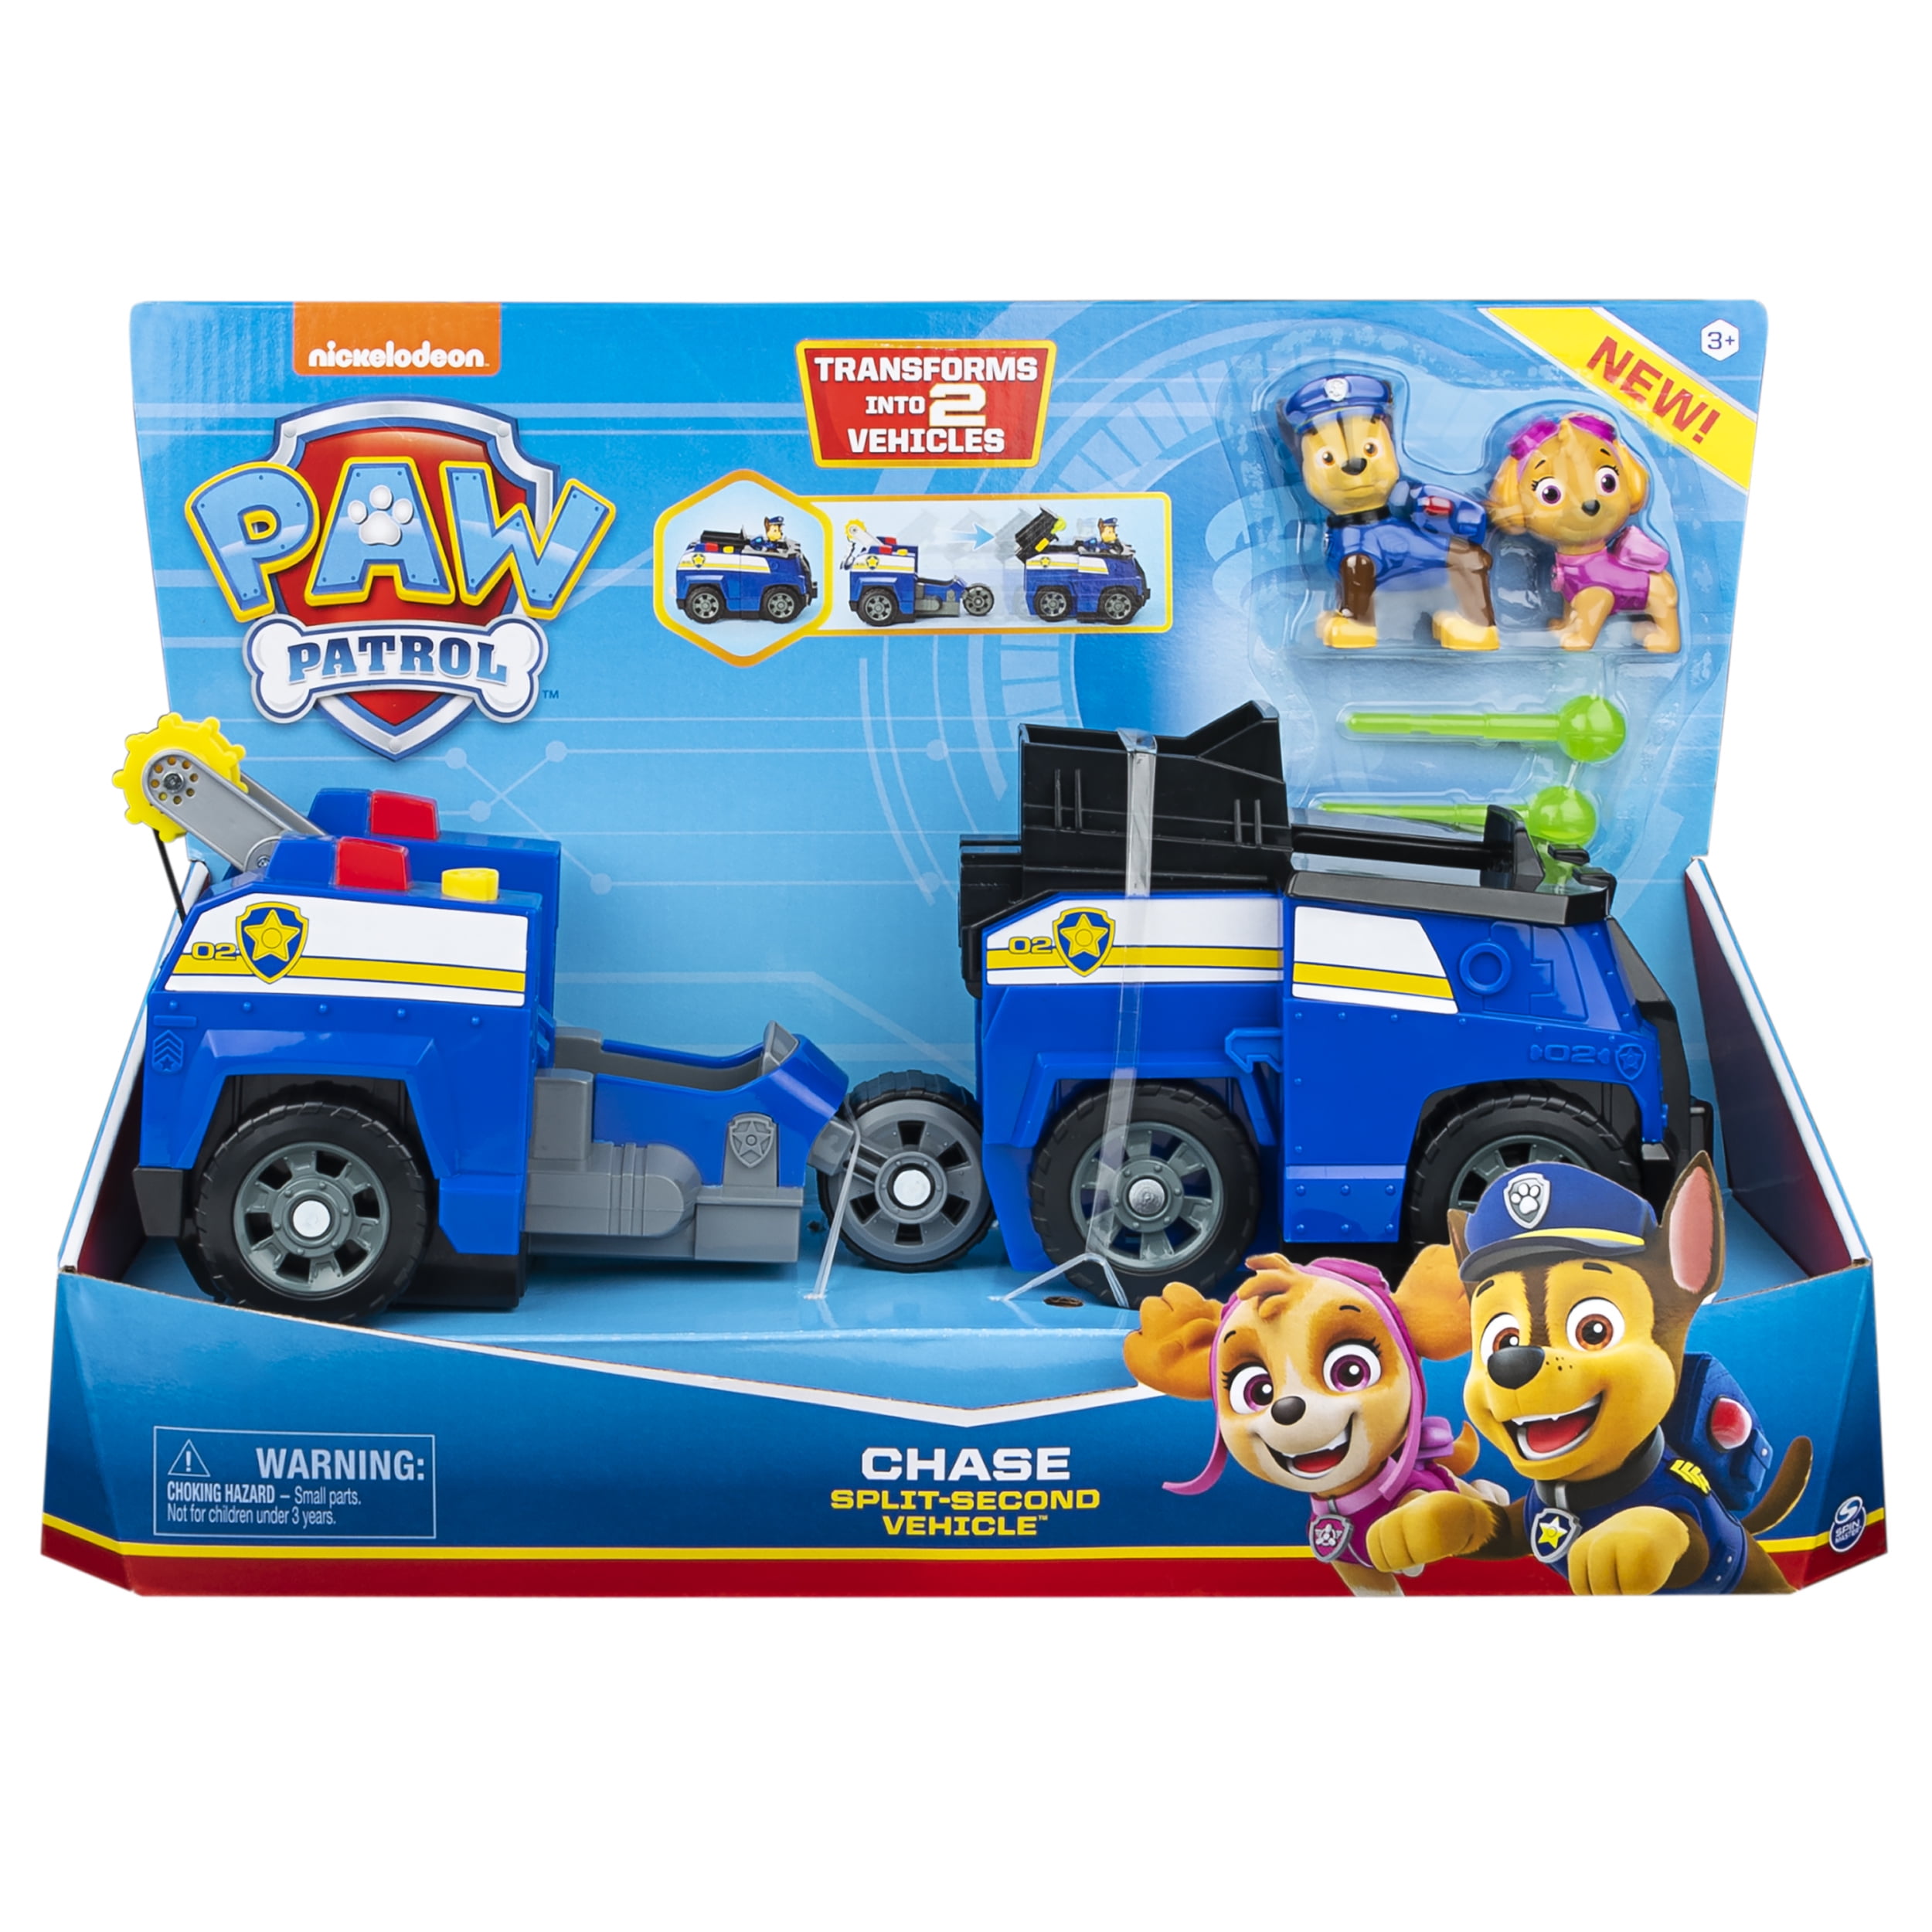 Paw Patrol Chase Split-second 2 in 1 Transforming Police Cruiser Vehicle Kid for sale online 